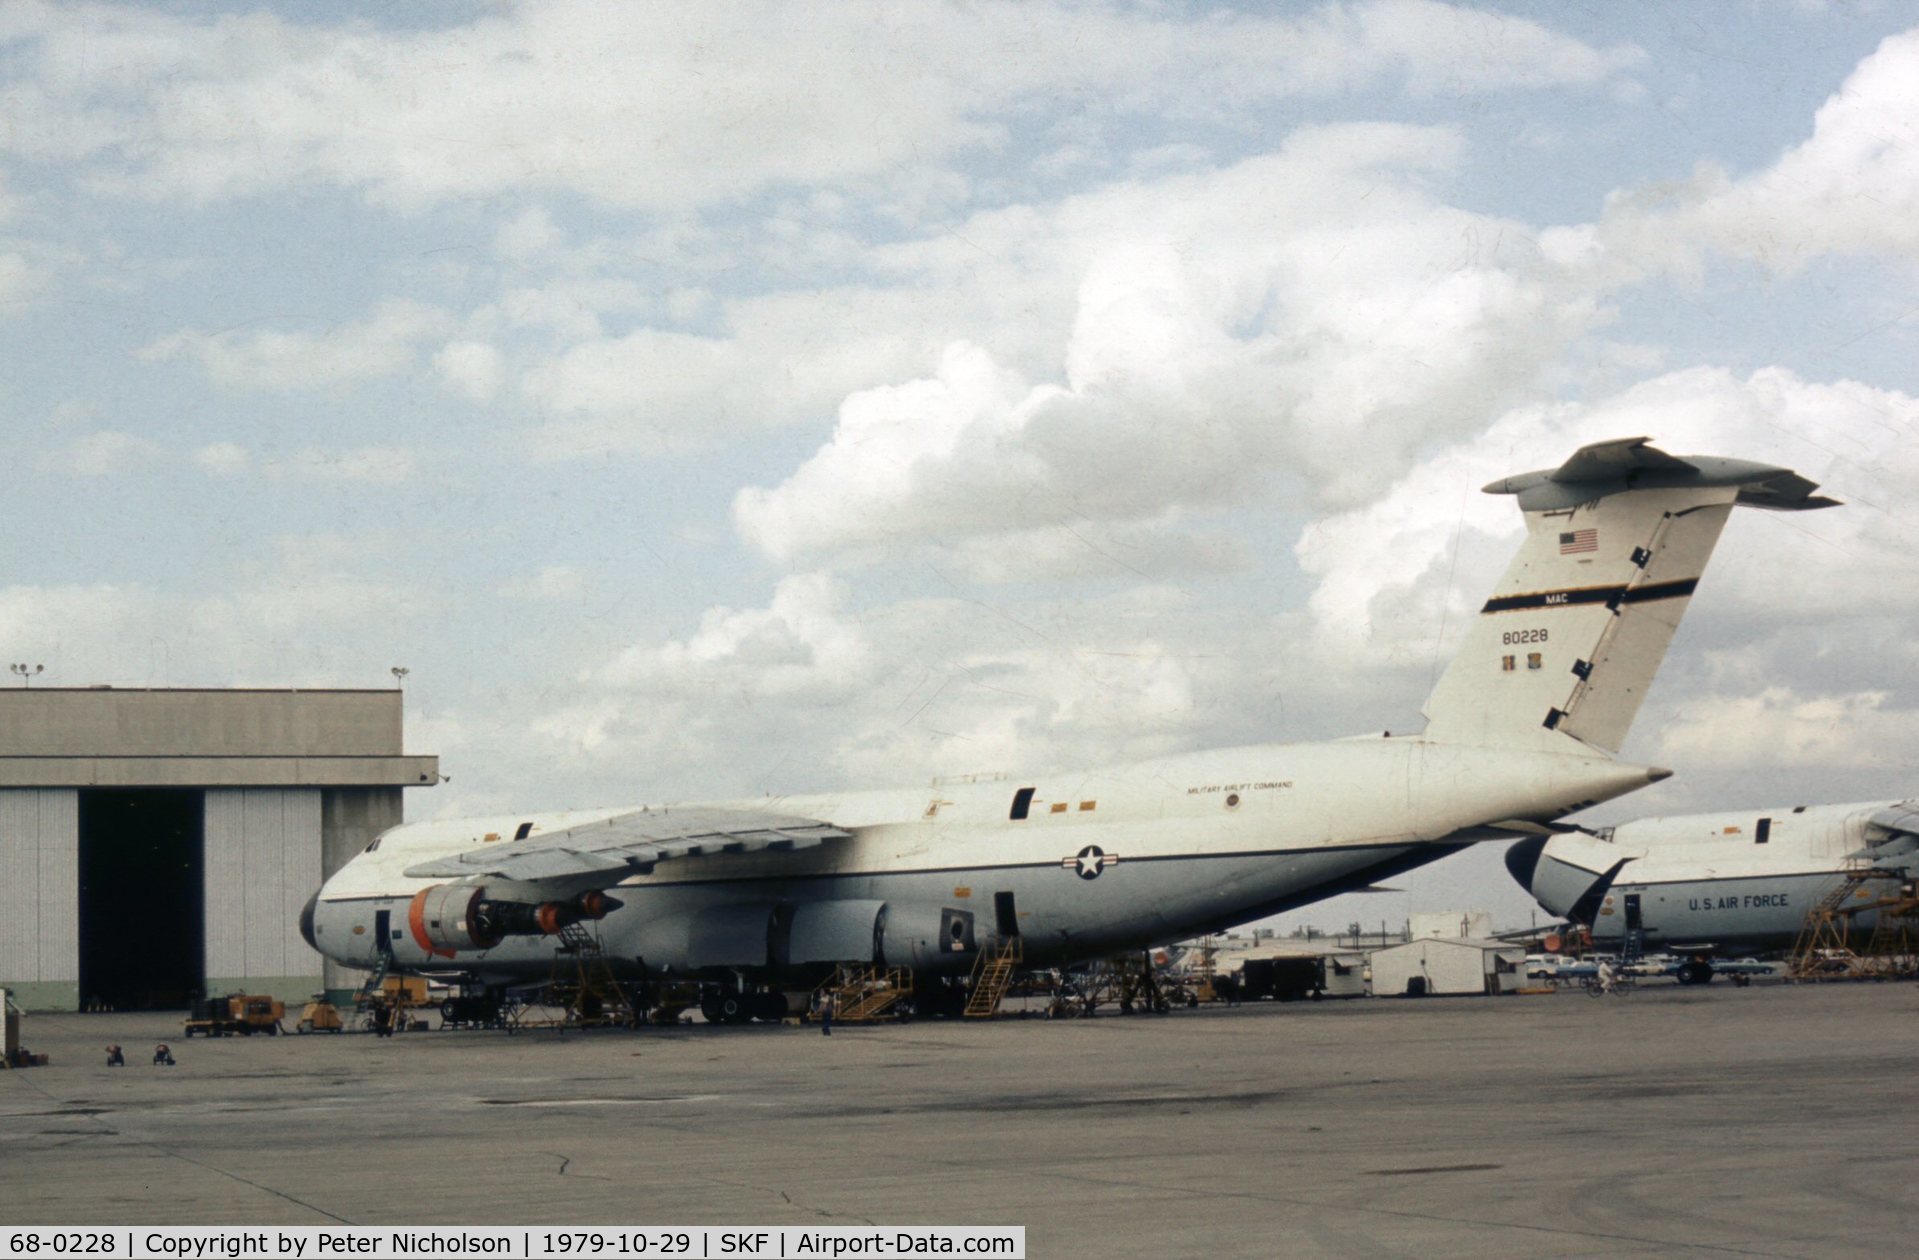 68-0228, 1968 Lockheed C-5A Galaxy C/N 500-0031, Another view of the 60th Military Airlift Wing C-5A Galaxy seen at Kelly AFB in October 1979.